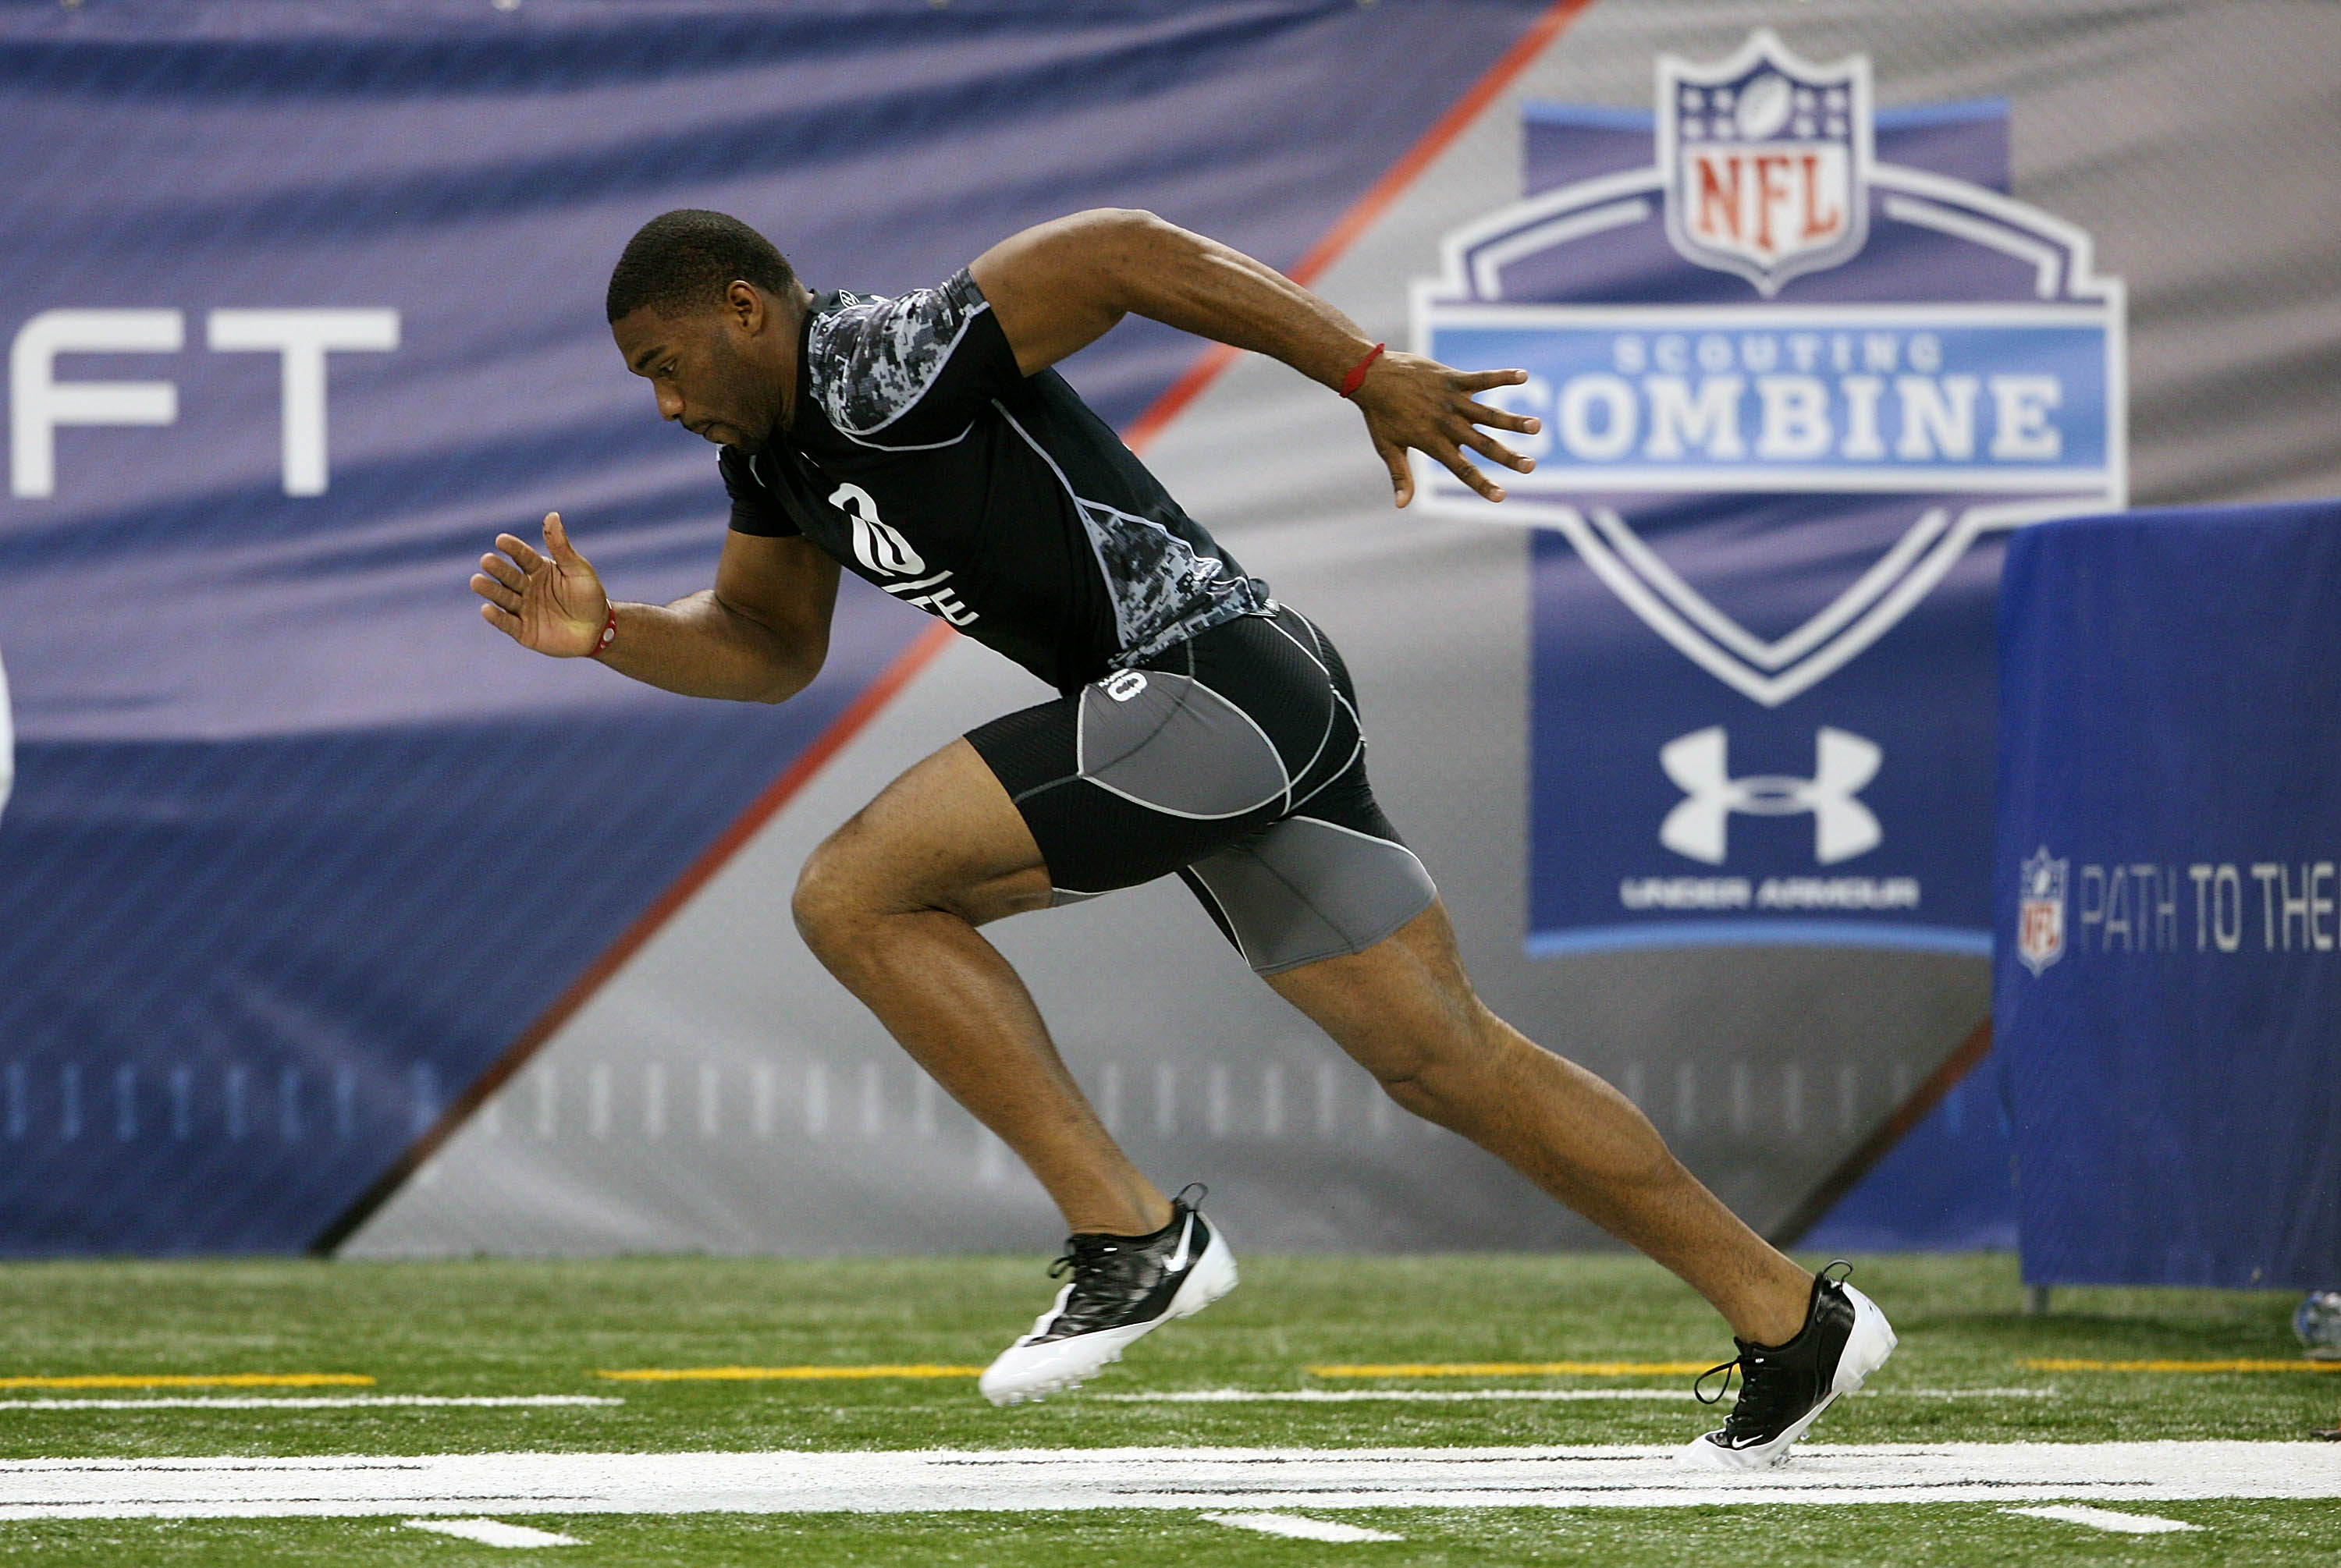 2010 NFL Scouting Combine